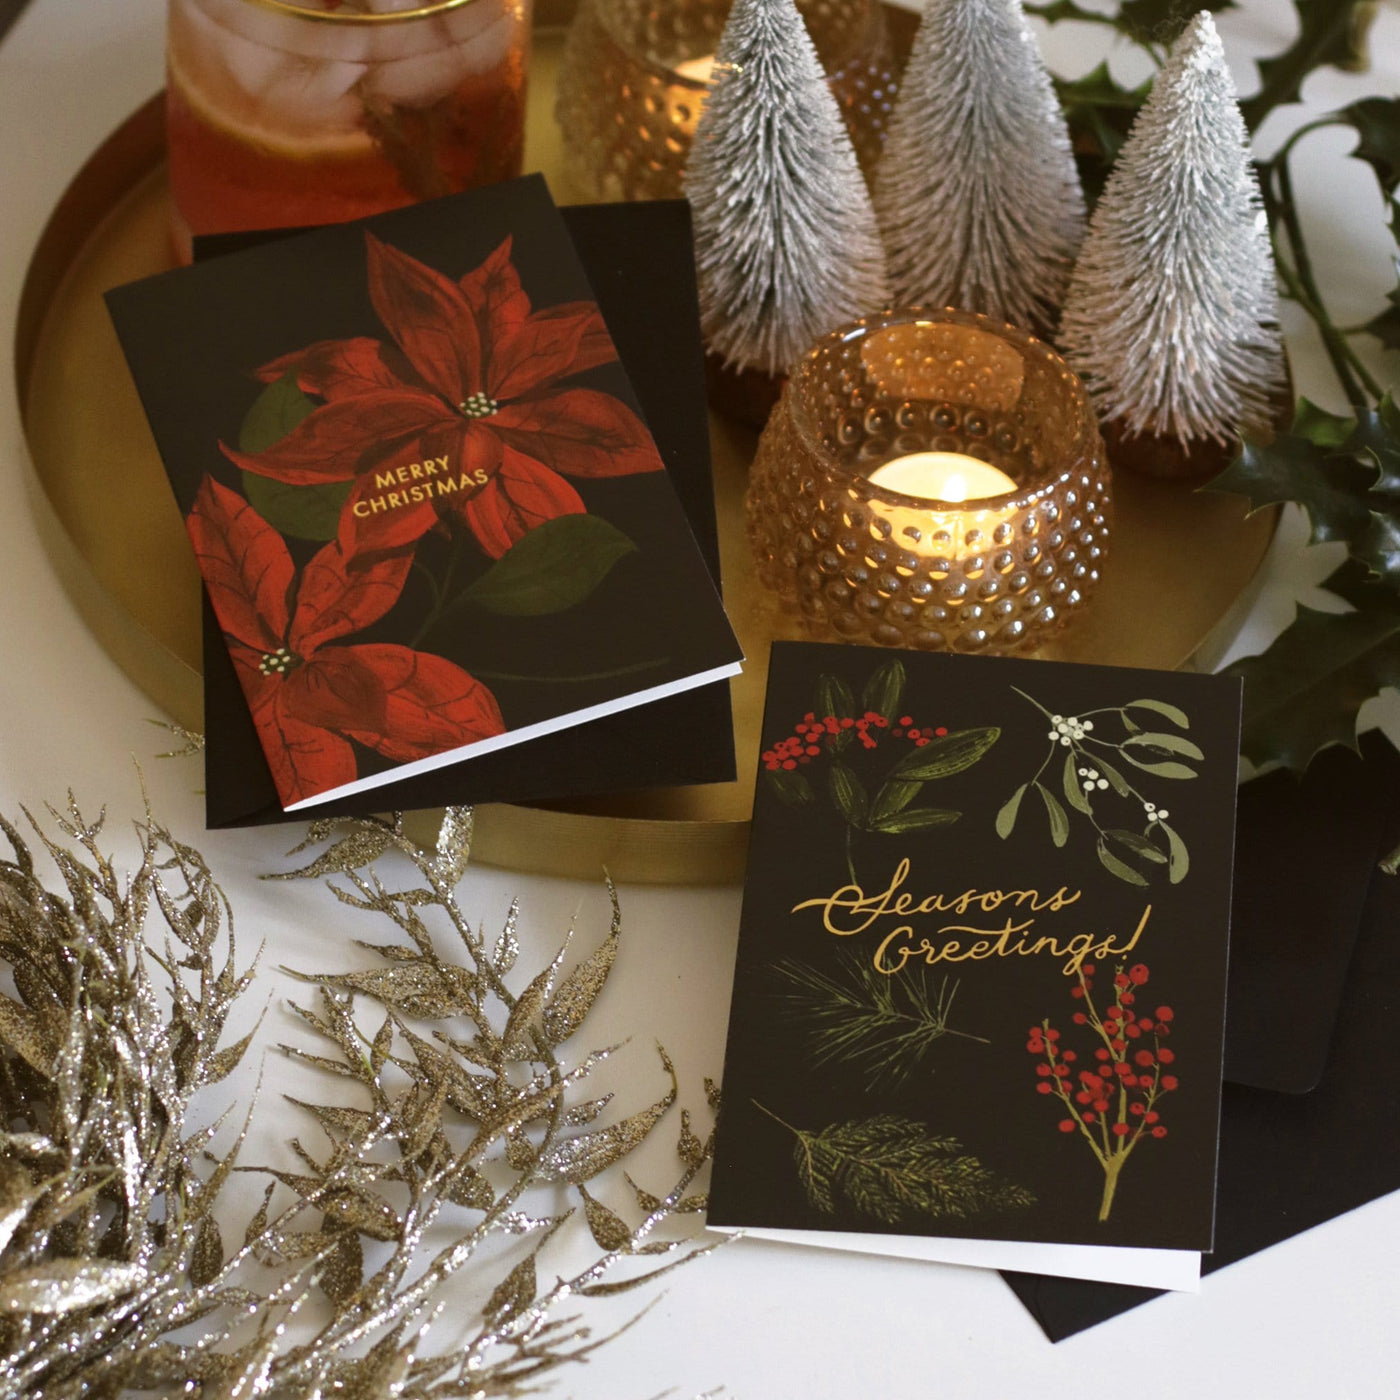 Red Poinsettia Illustration On A Black Merry Christmas Greetings A6 Card  With Black Envelope - Annie Dornan Smith